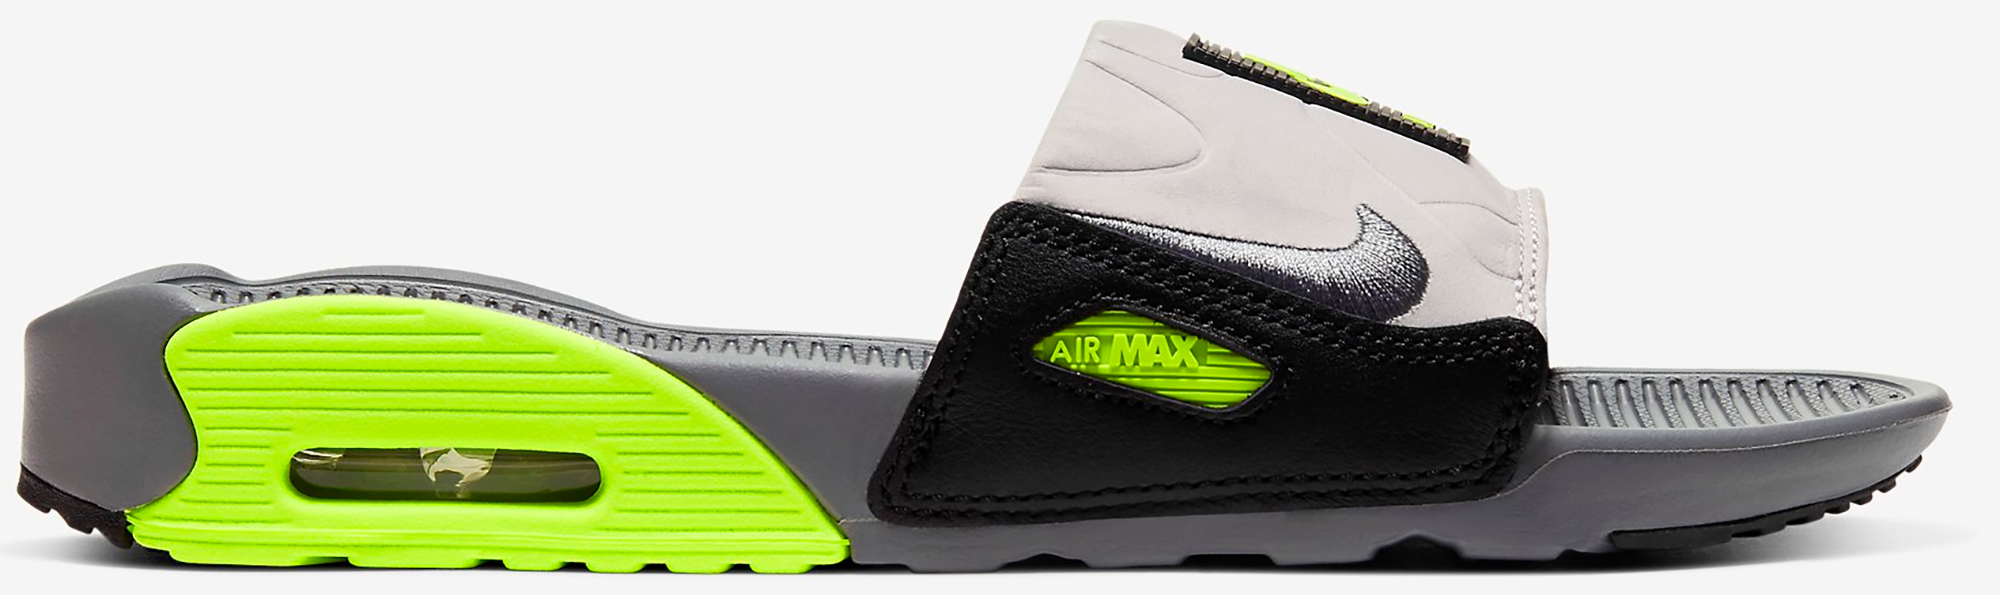 air max 90 slides release date